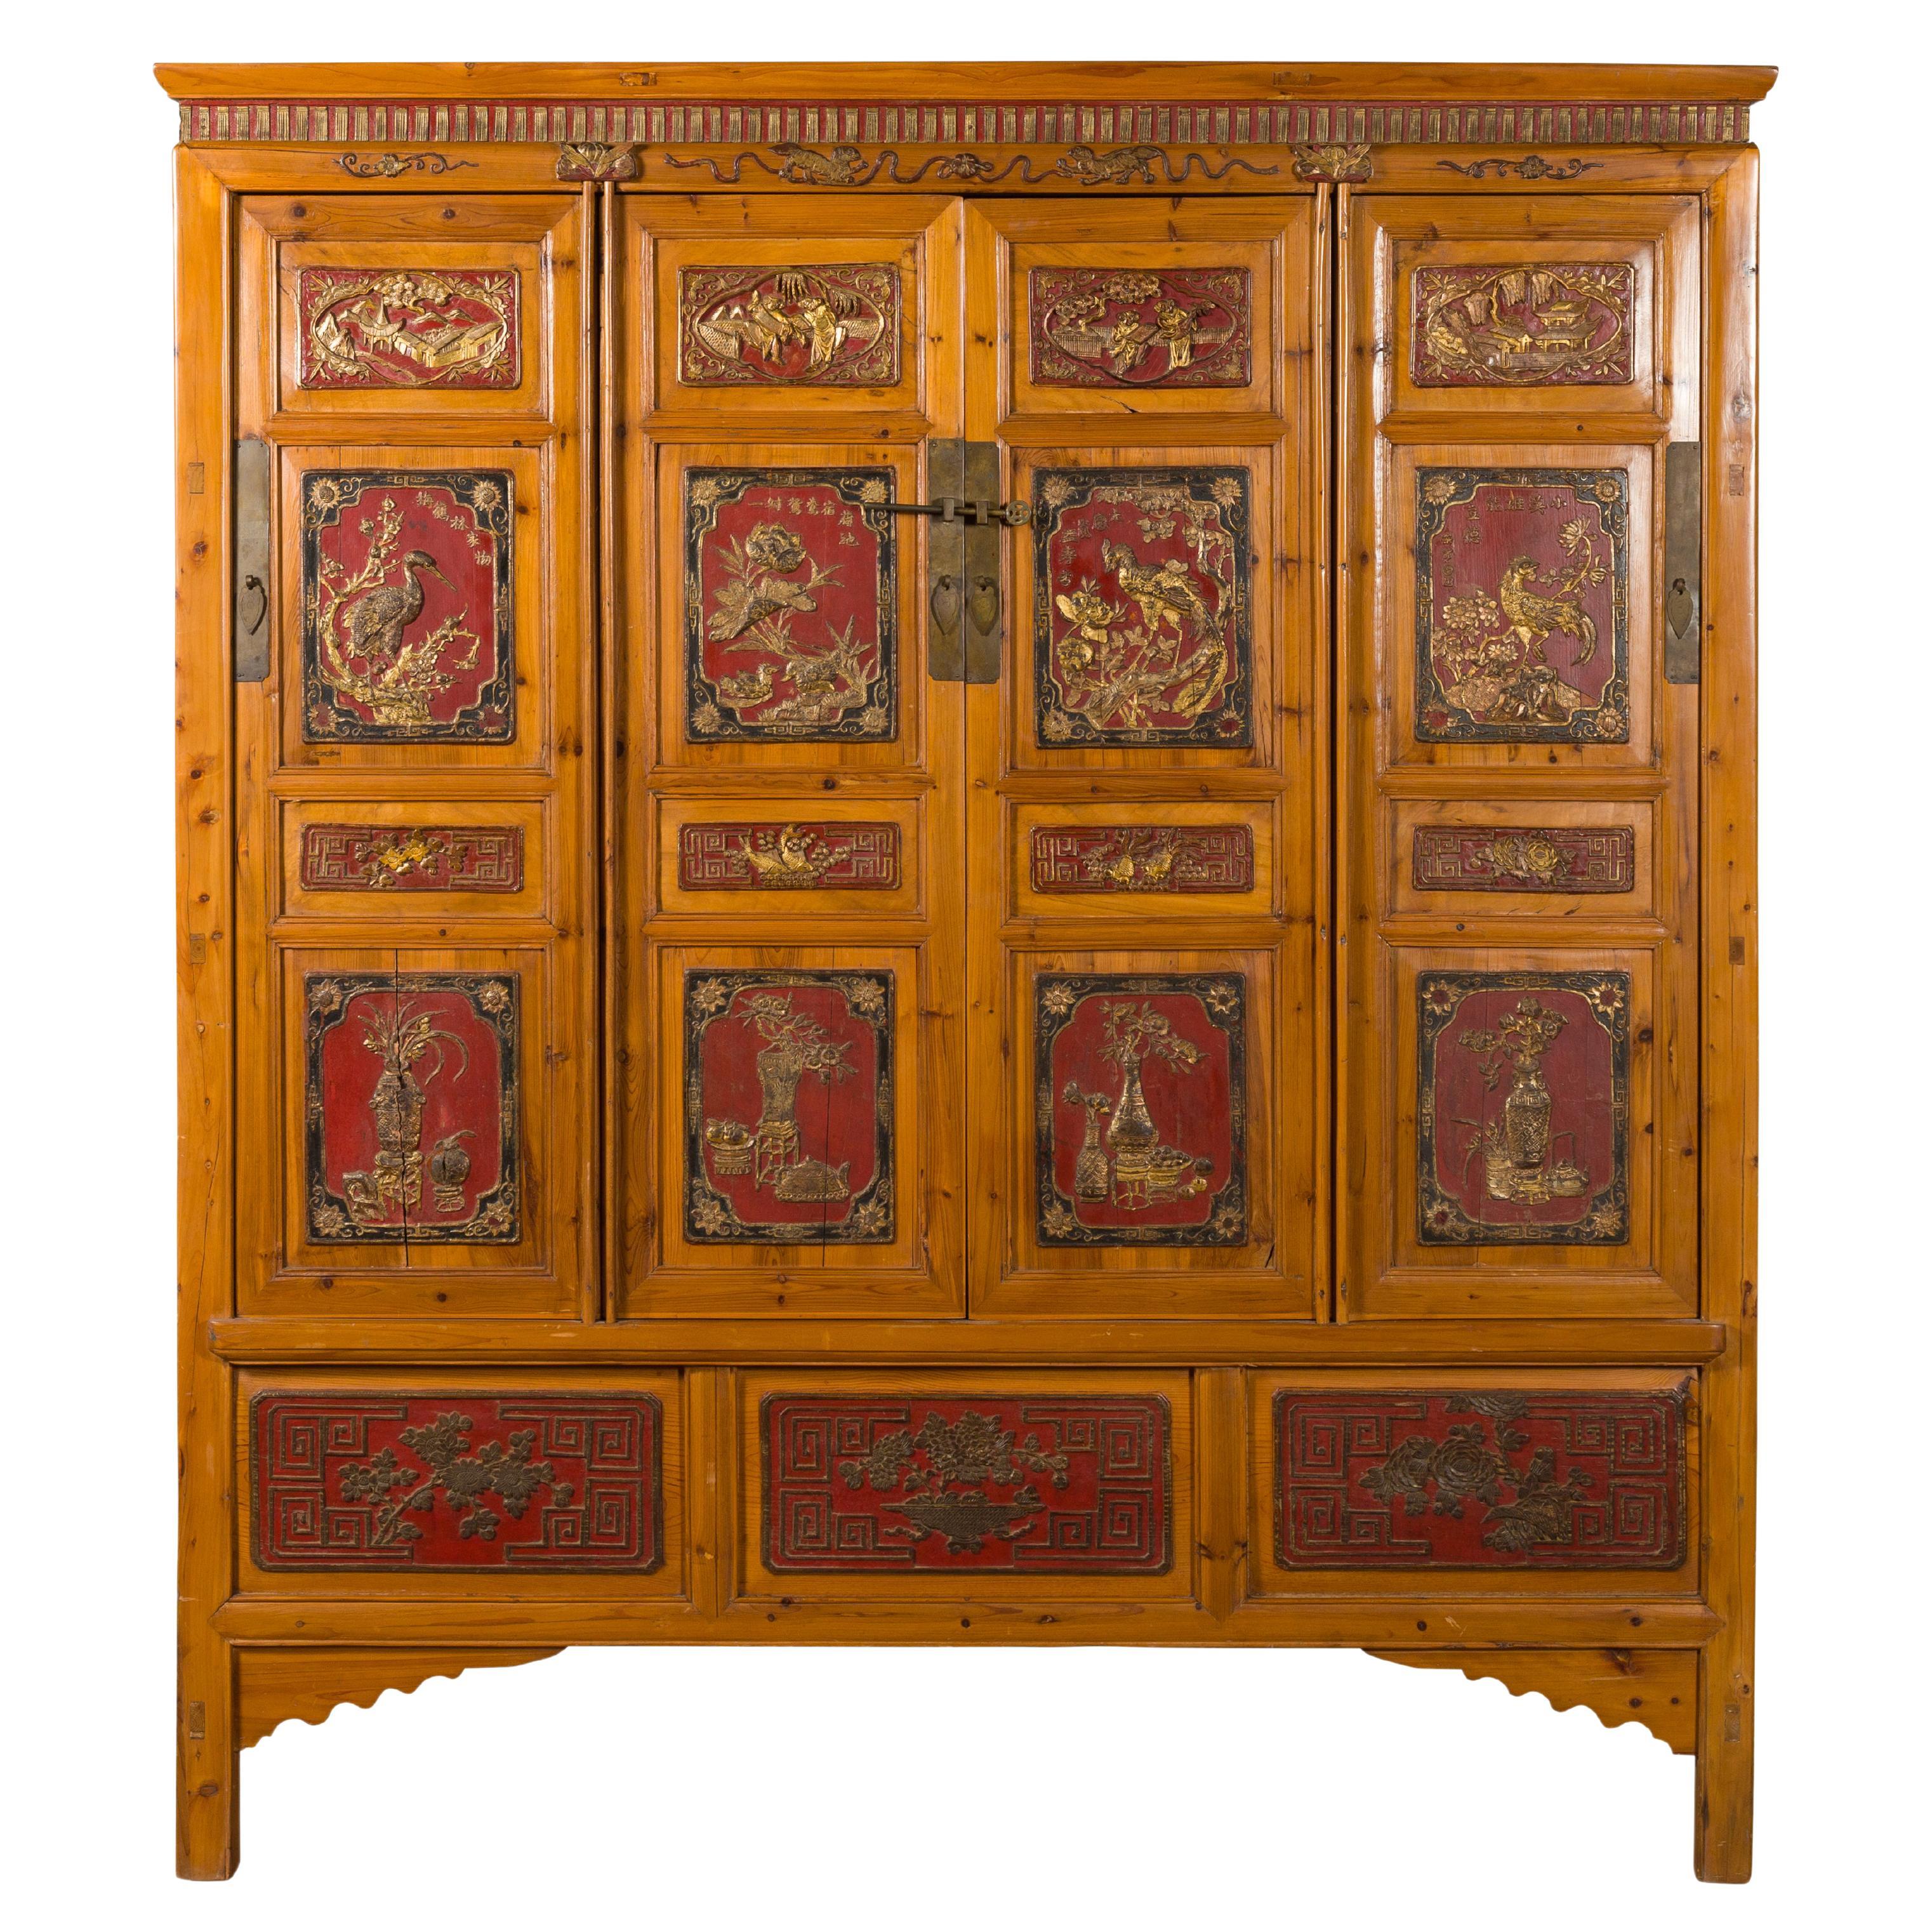 Large Chinese Qing Dynasty 19th Century Cabinet with Hand-Carved and Gilt Panels